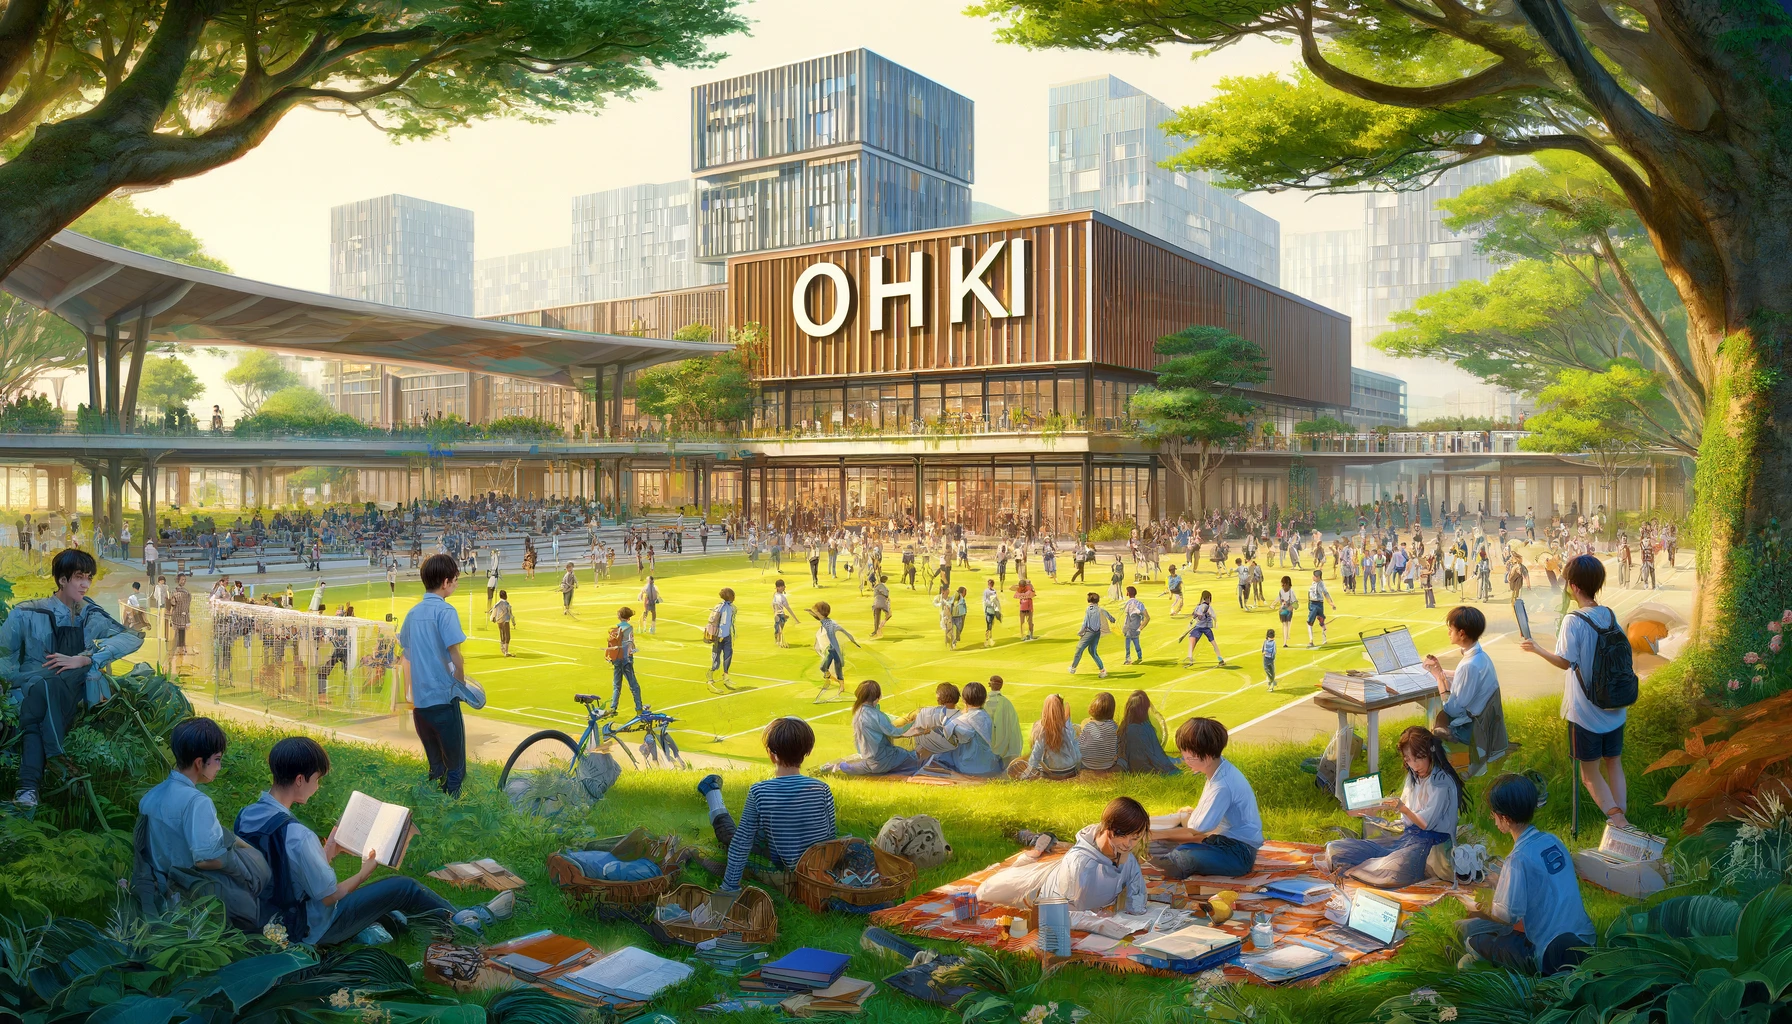 A vibrant campus scene at Ohki High School, showcasing its popularity. The image features a diverse group of students engaged in various activities around a lush and spacious campus. Some students are studying outdoors on picnic blankets, others are participating in a soccer game, and a few are performing in a band practice session. The school buildings in the background blend modern architecture with natural green spaces, providing a dynamic and inviting atmosphere. The word 'OHKI' is prominently displayed in bold English letters, reflecting the school's strong community and academic spirit.